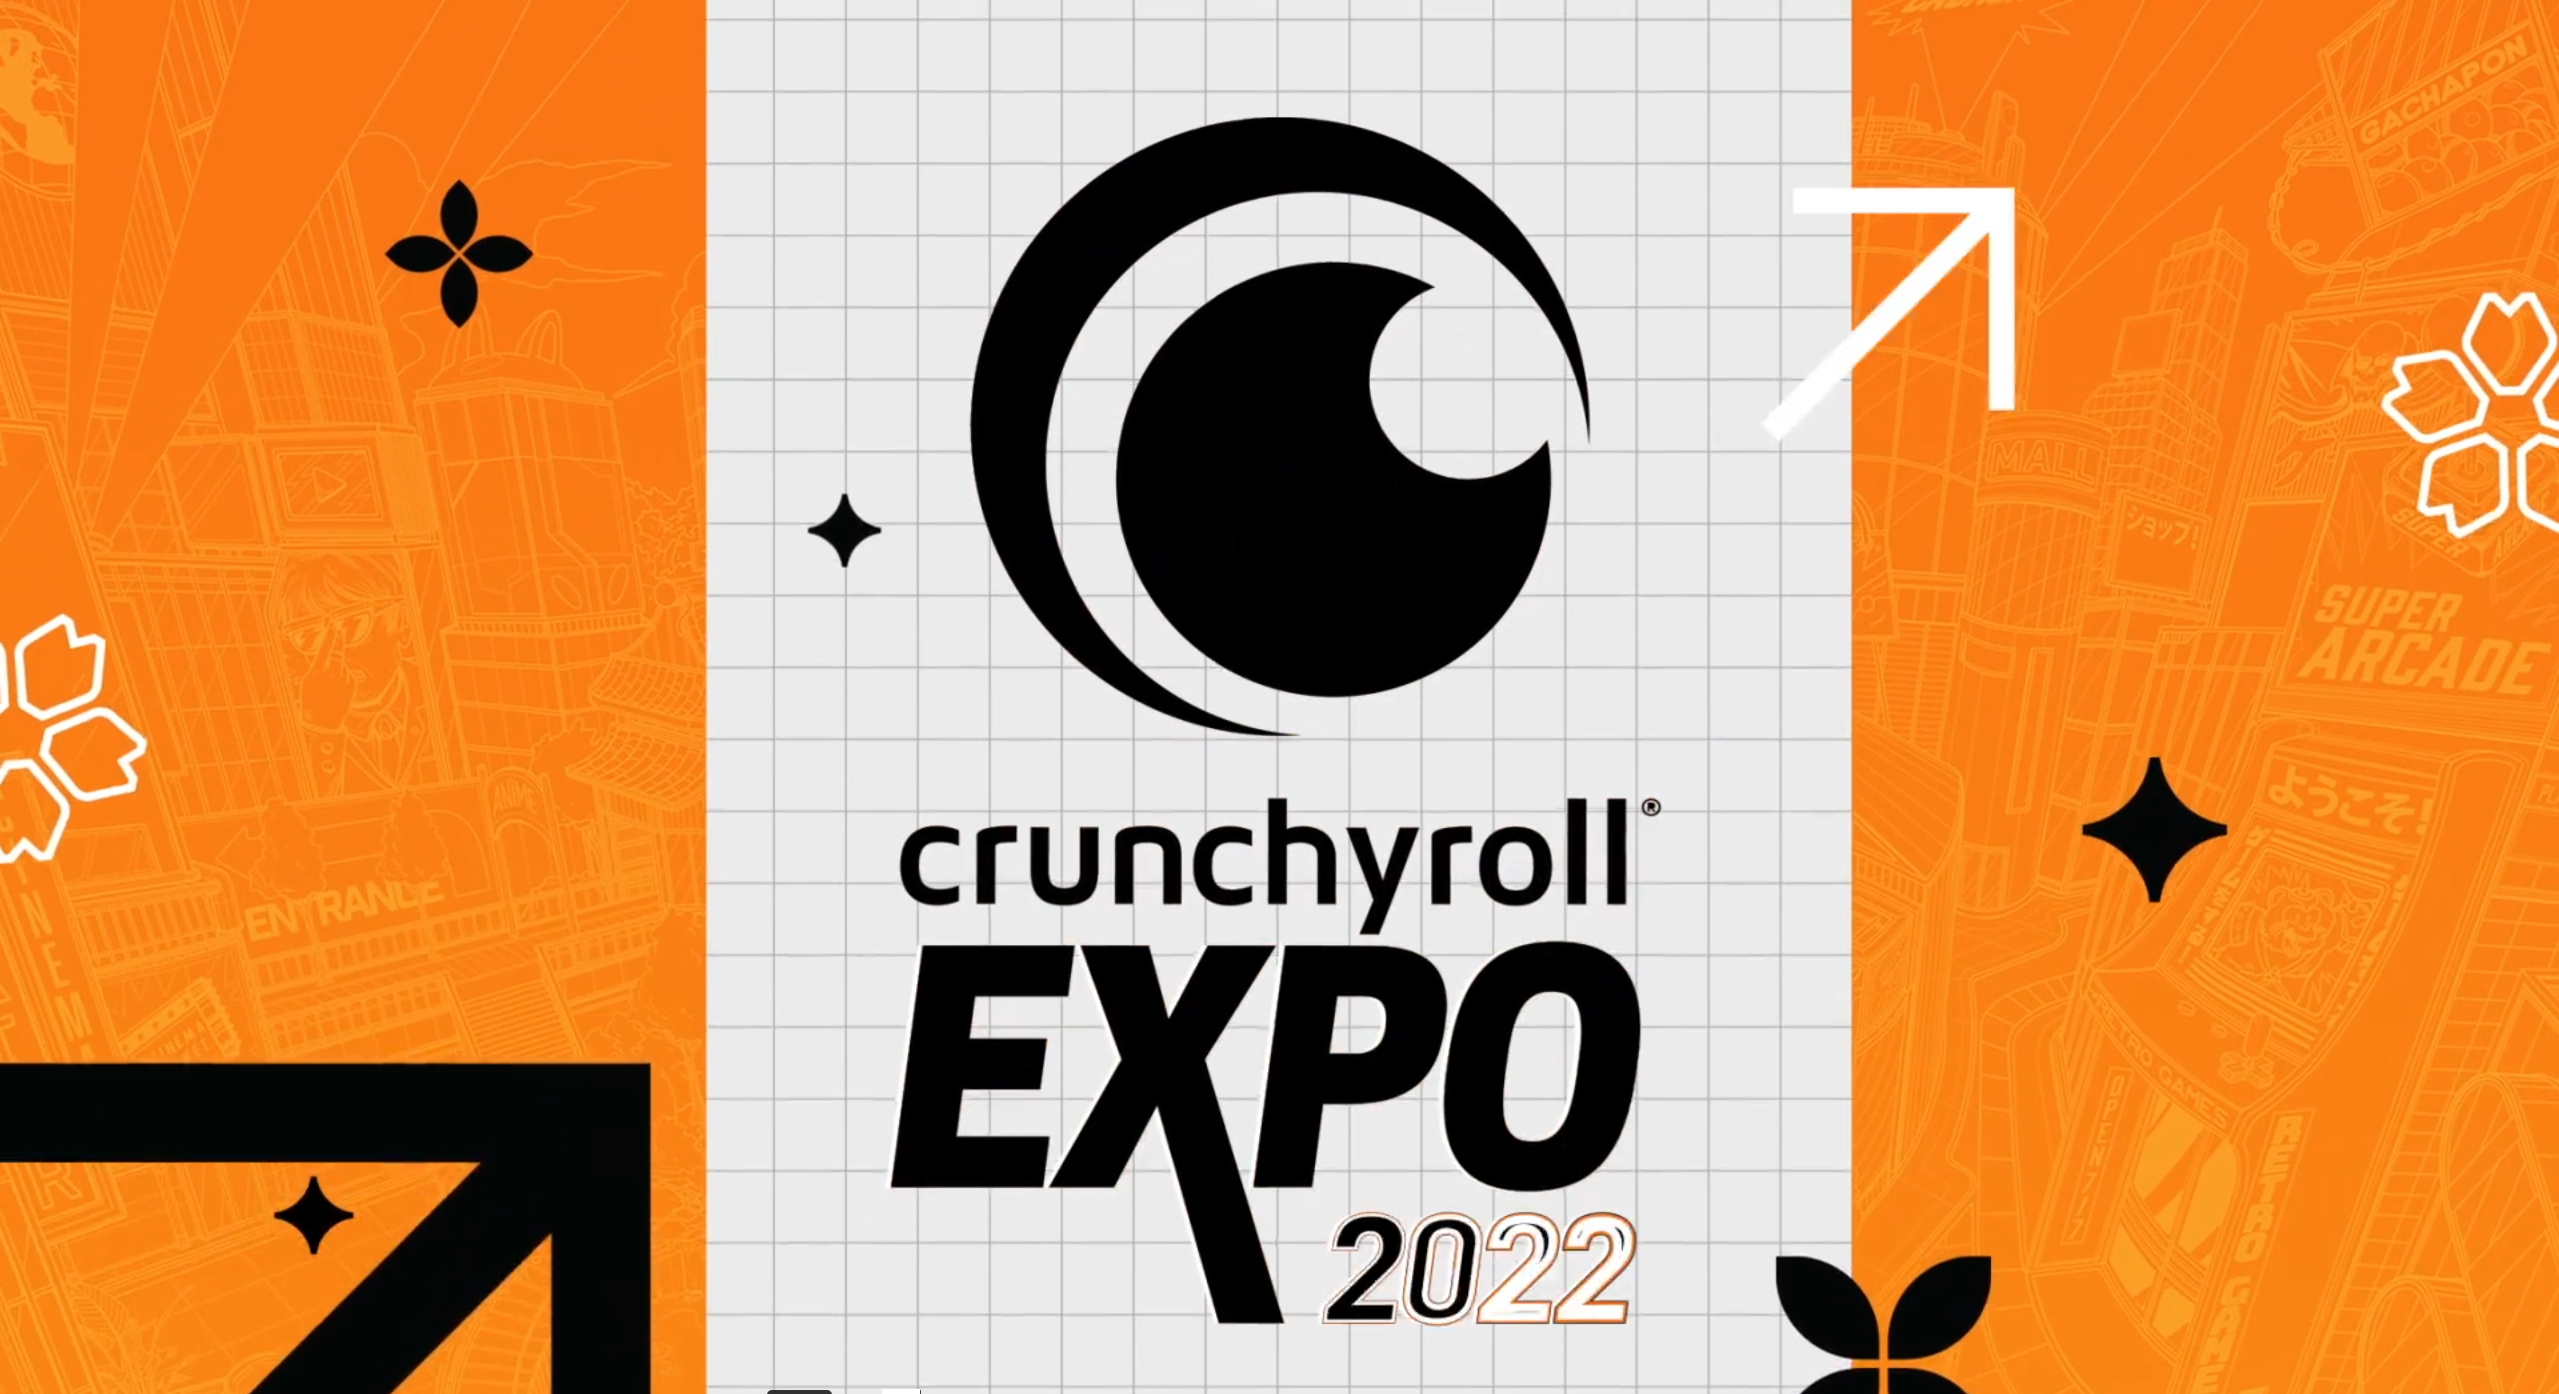 ATTENTION Music Loving Weebs: New Crunchy City Music Fest Coming With Crunchyroll Expo! ATARASHII GAKKO! Performing